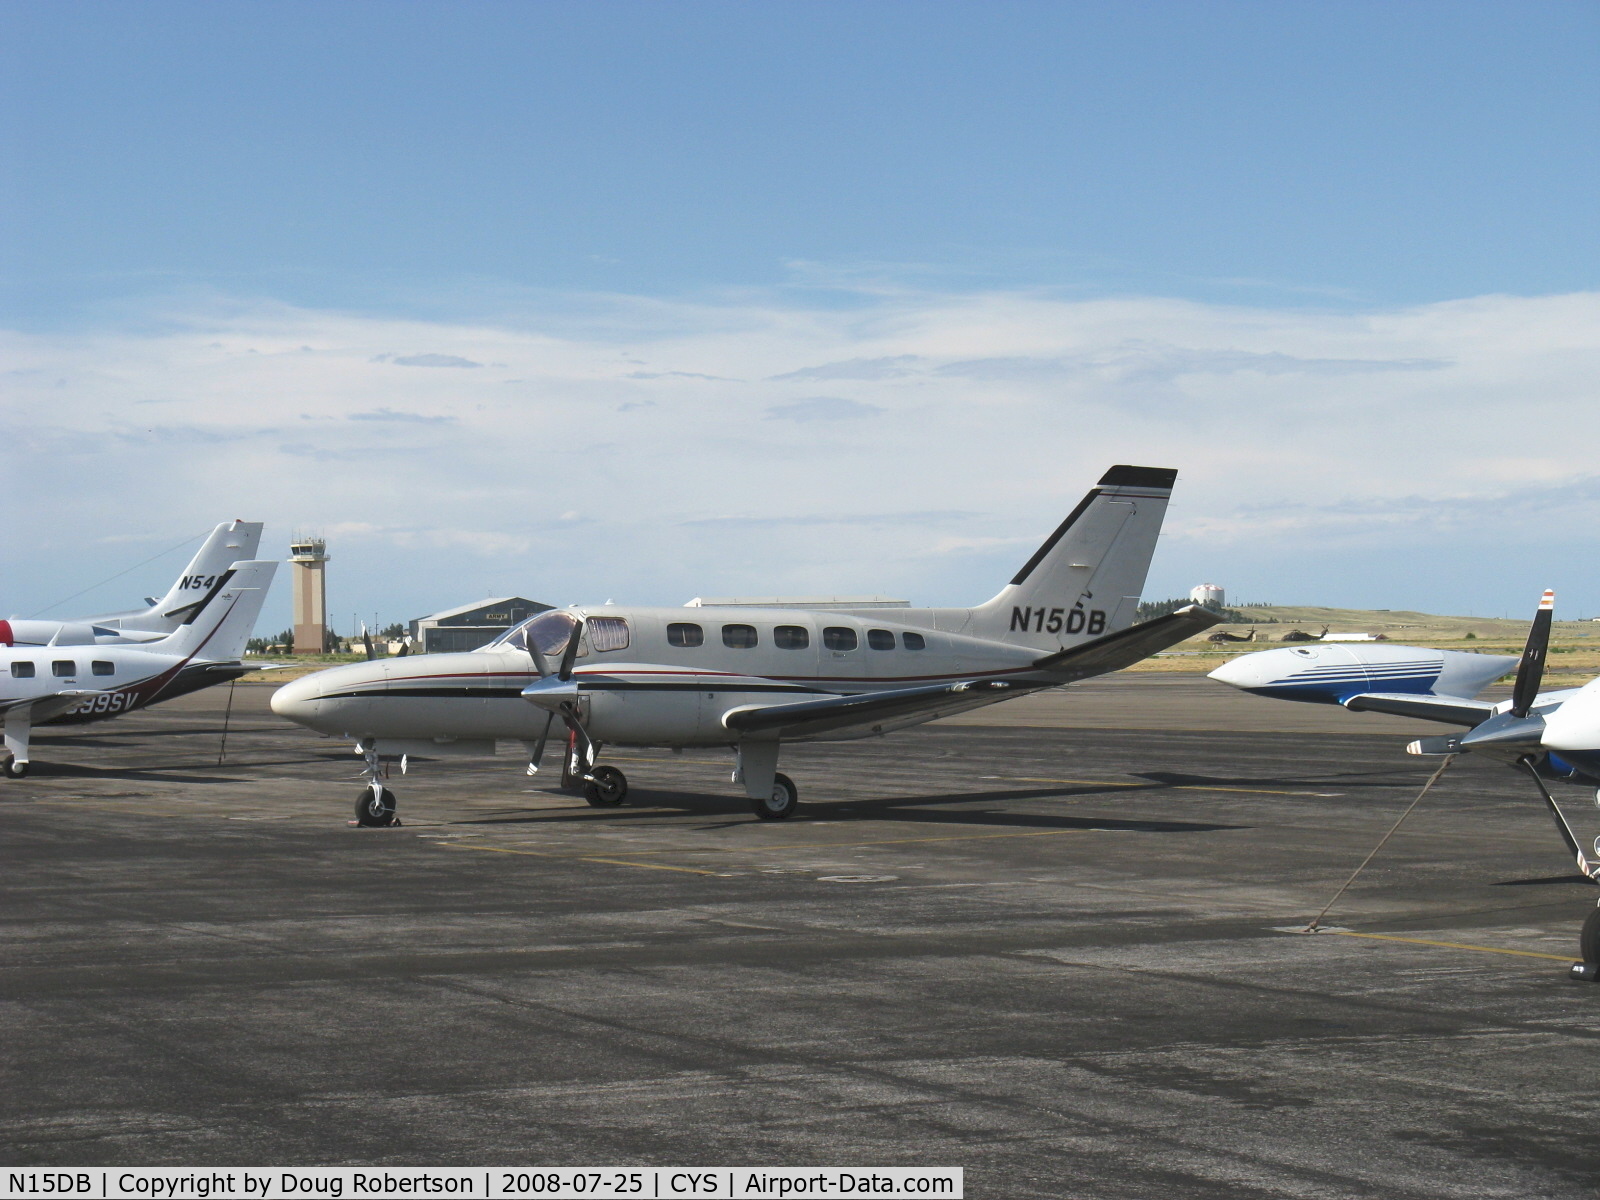 N15DB, 1981 Cessna 441 C/N 441-0278, 1981 Cessna 441 CONQUEST, one Airesearch TPE 331-8 401S and one TPE 331-8 402S counter-rotating turboprops flat rated at 635.5 shp each